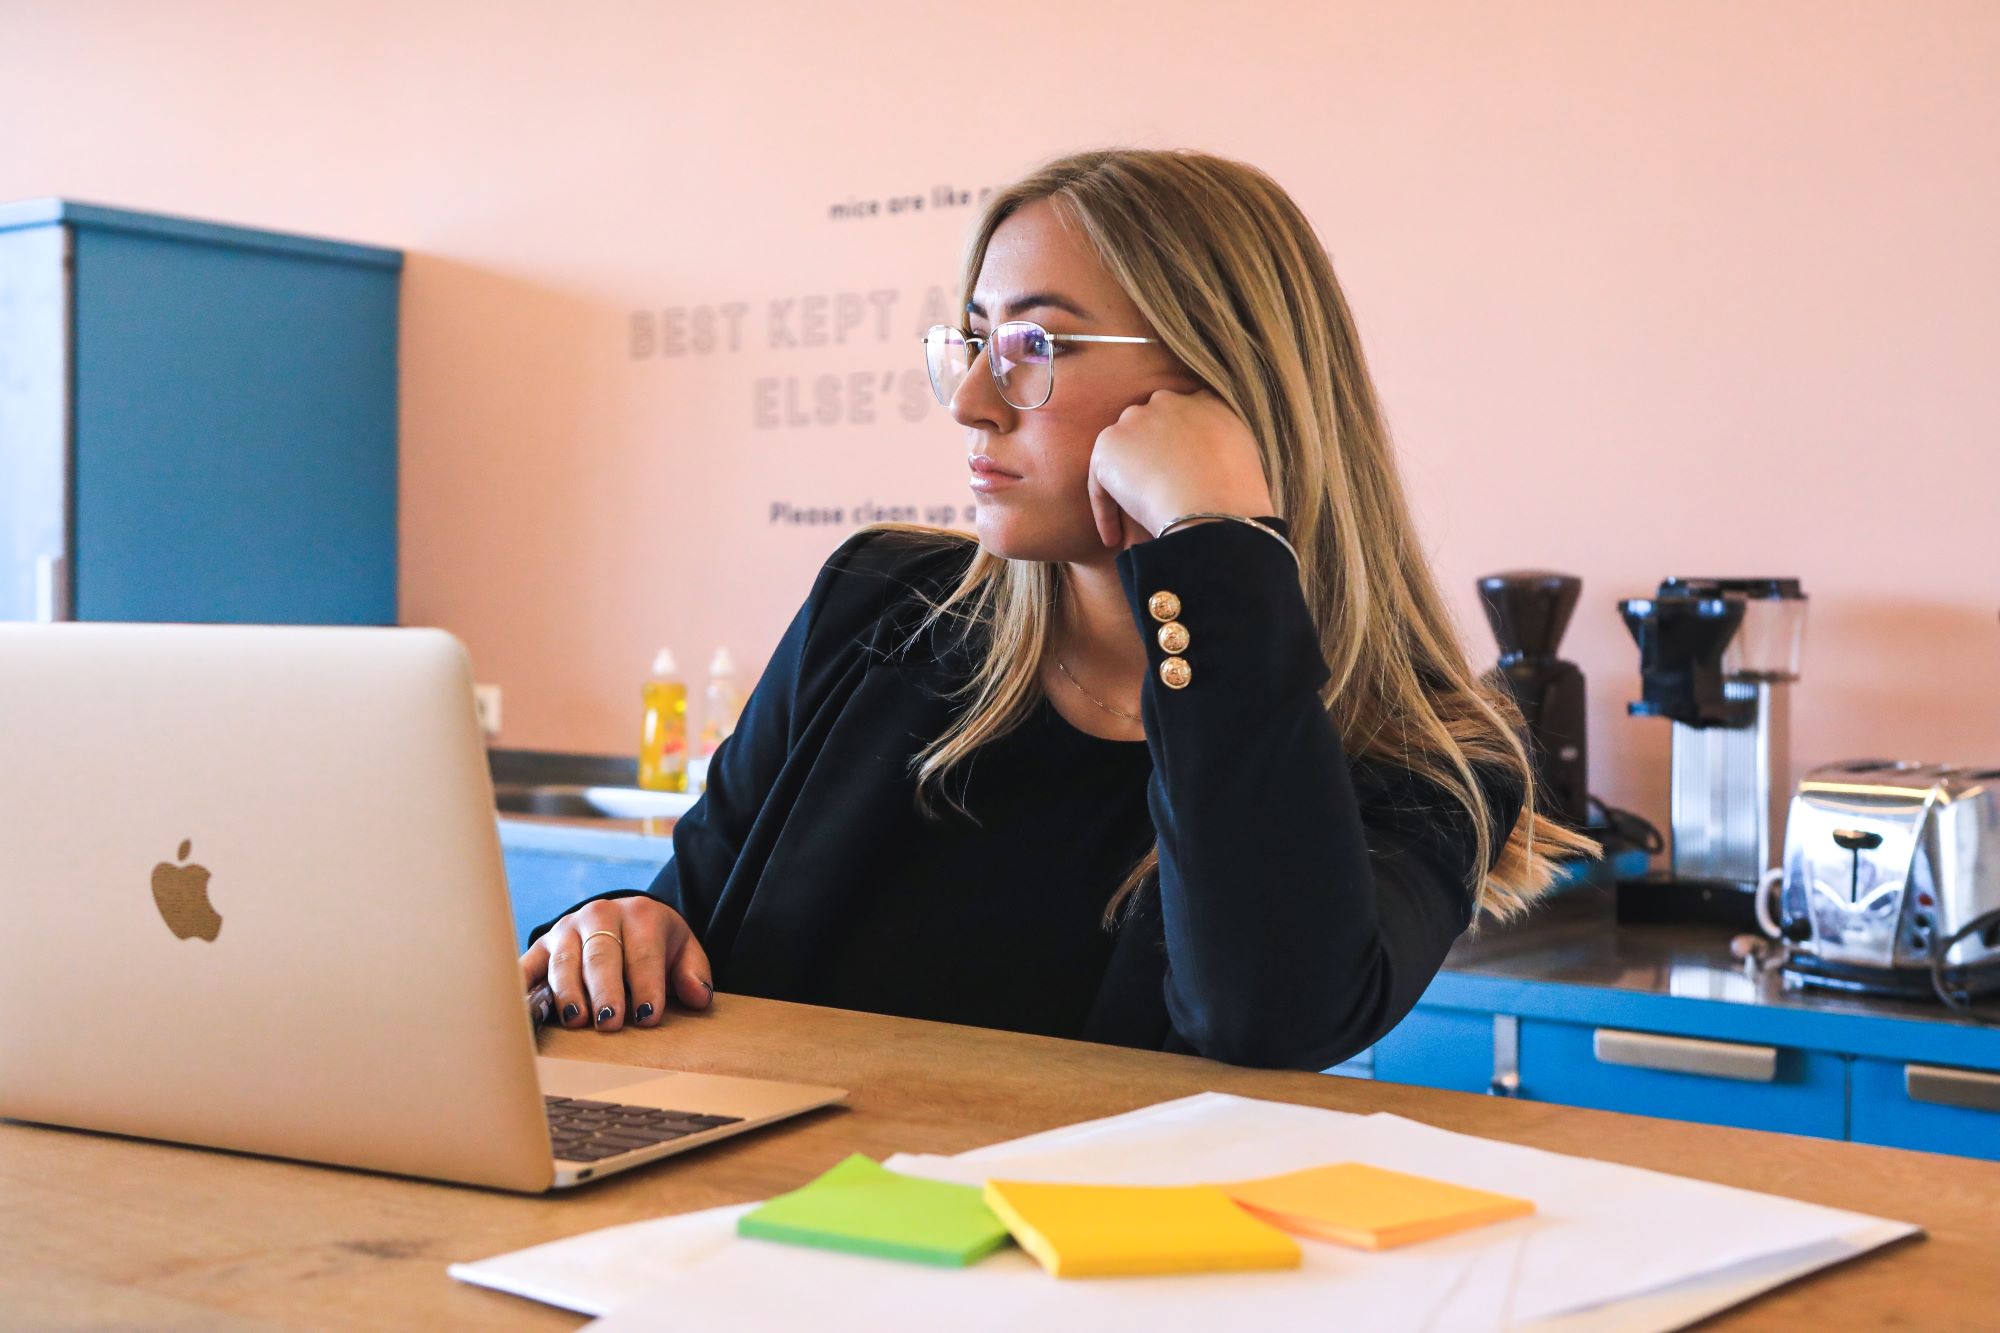 Woman wearing glasses sits at a laptop. She is in a thinking pose. Perhaps she in wondering if what she is experiencing is imposter syndrome, fear or self doubt.